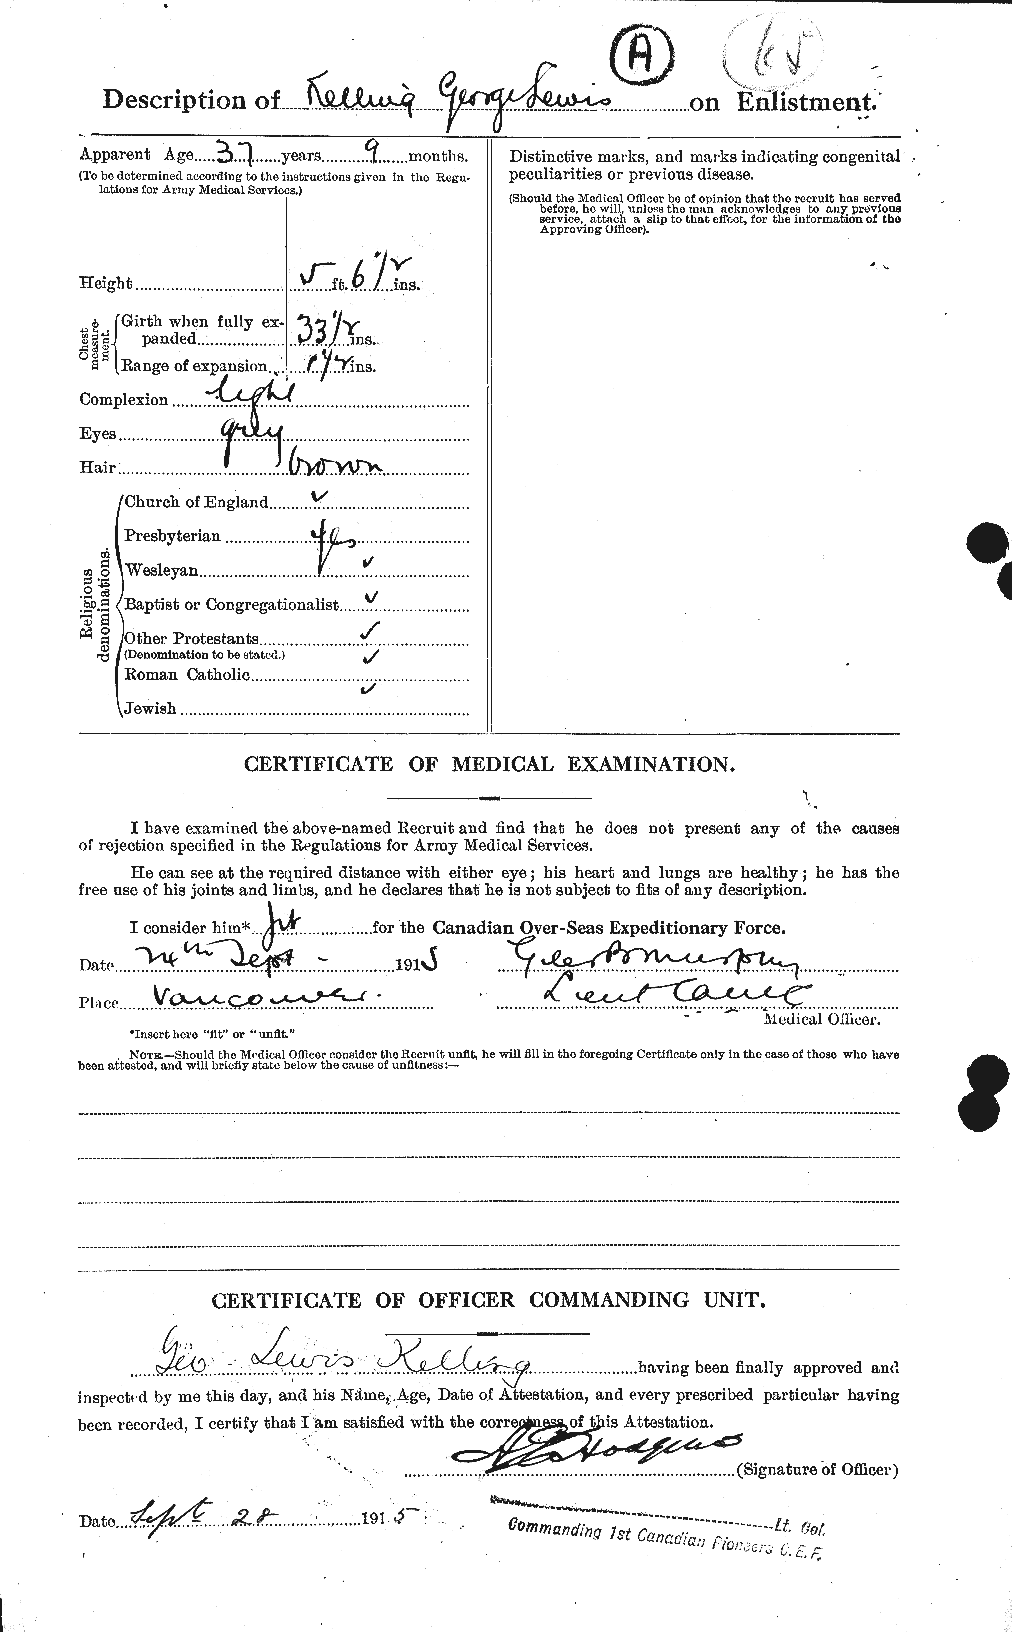 Personnel Records of the First World War - CEF 429117b